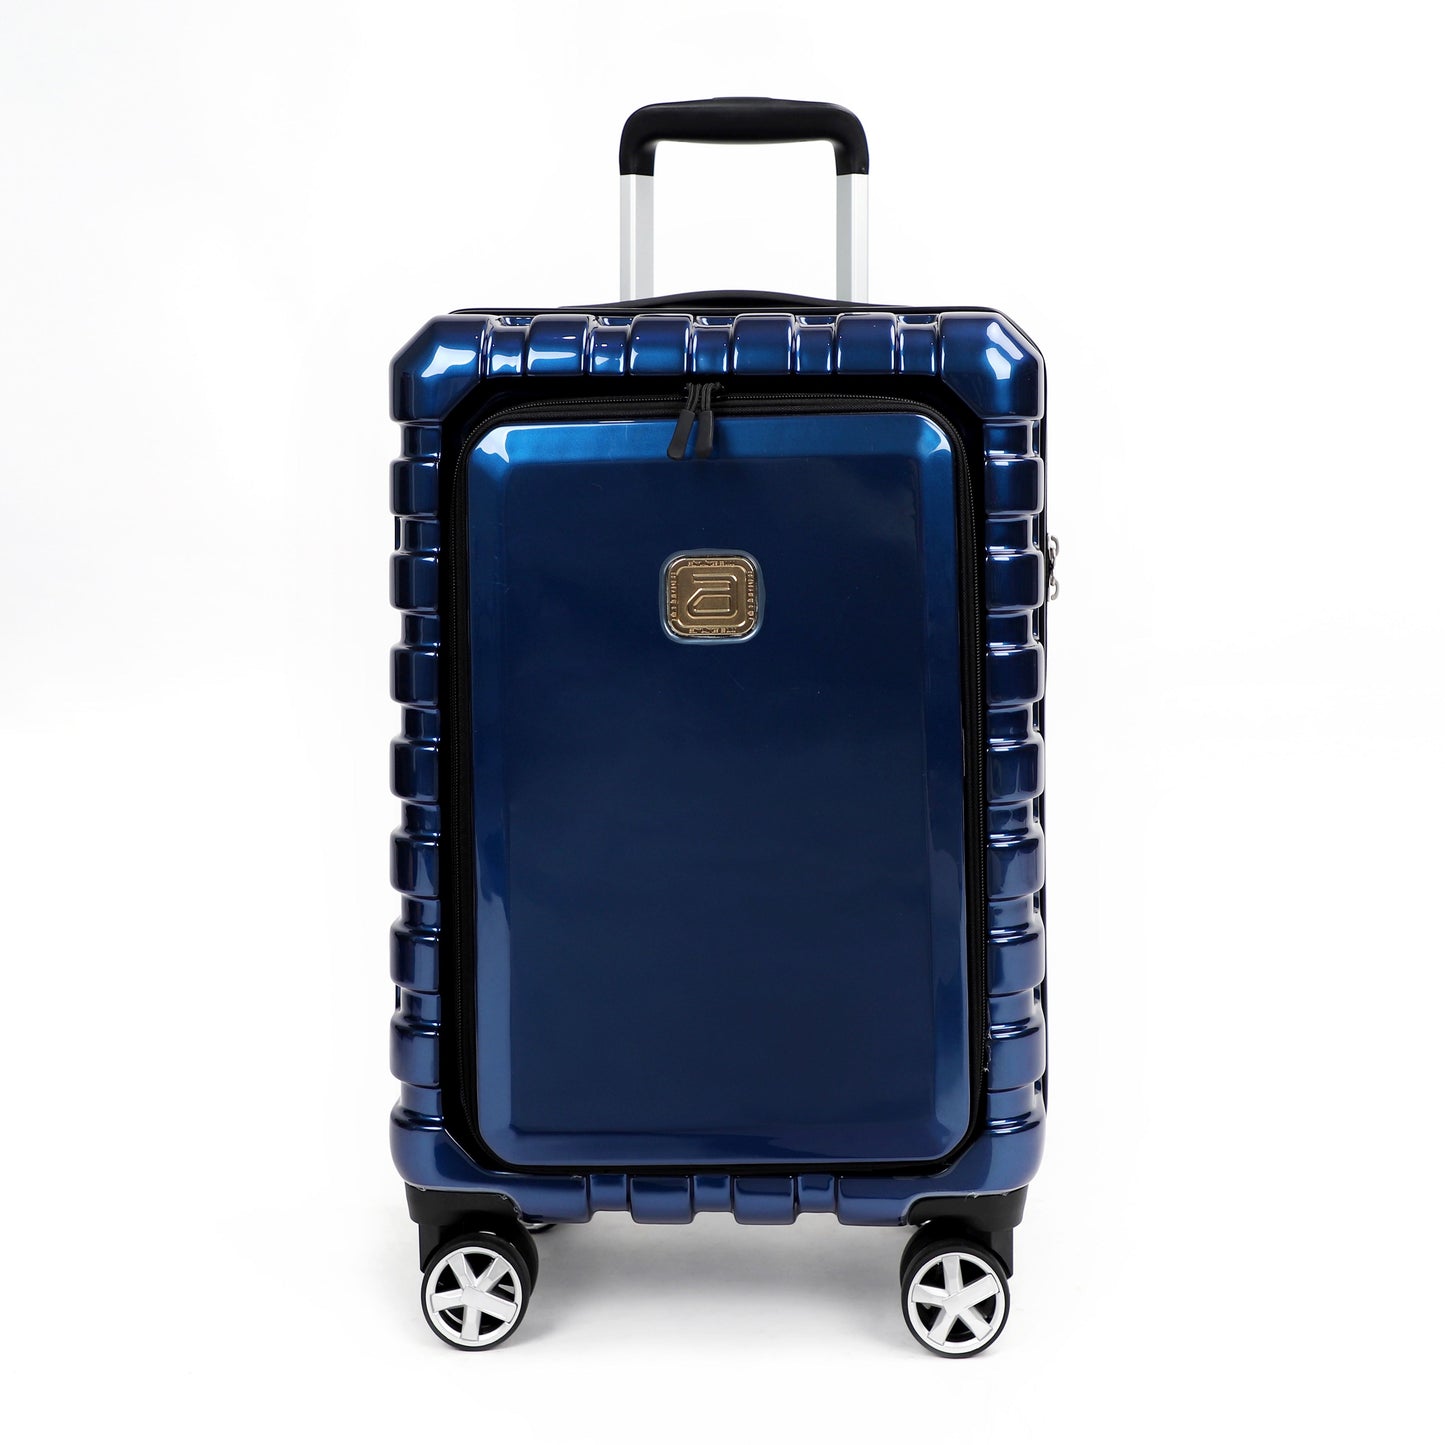 Airline_Carry_On_Luggage_Blue_front_viewT1978155005